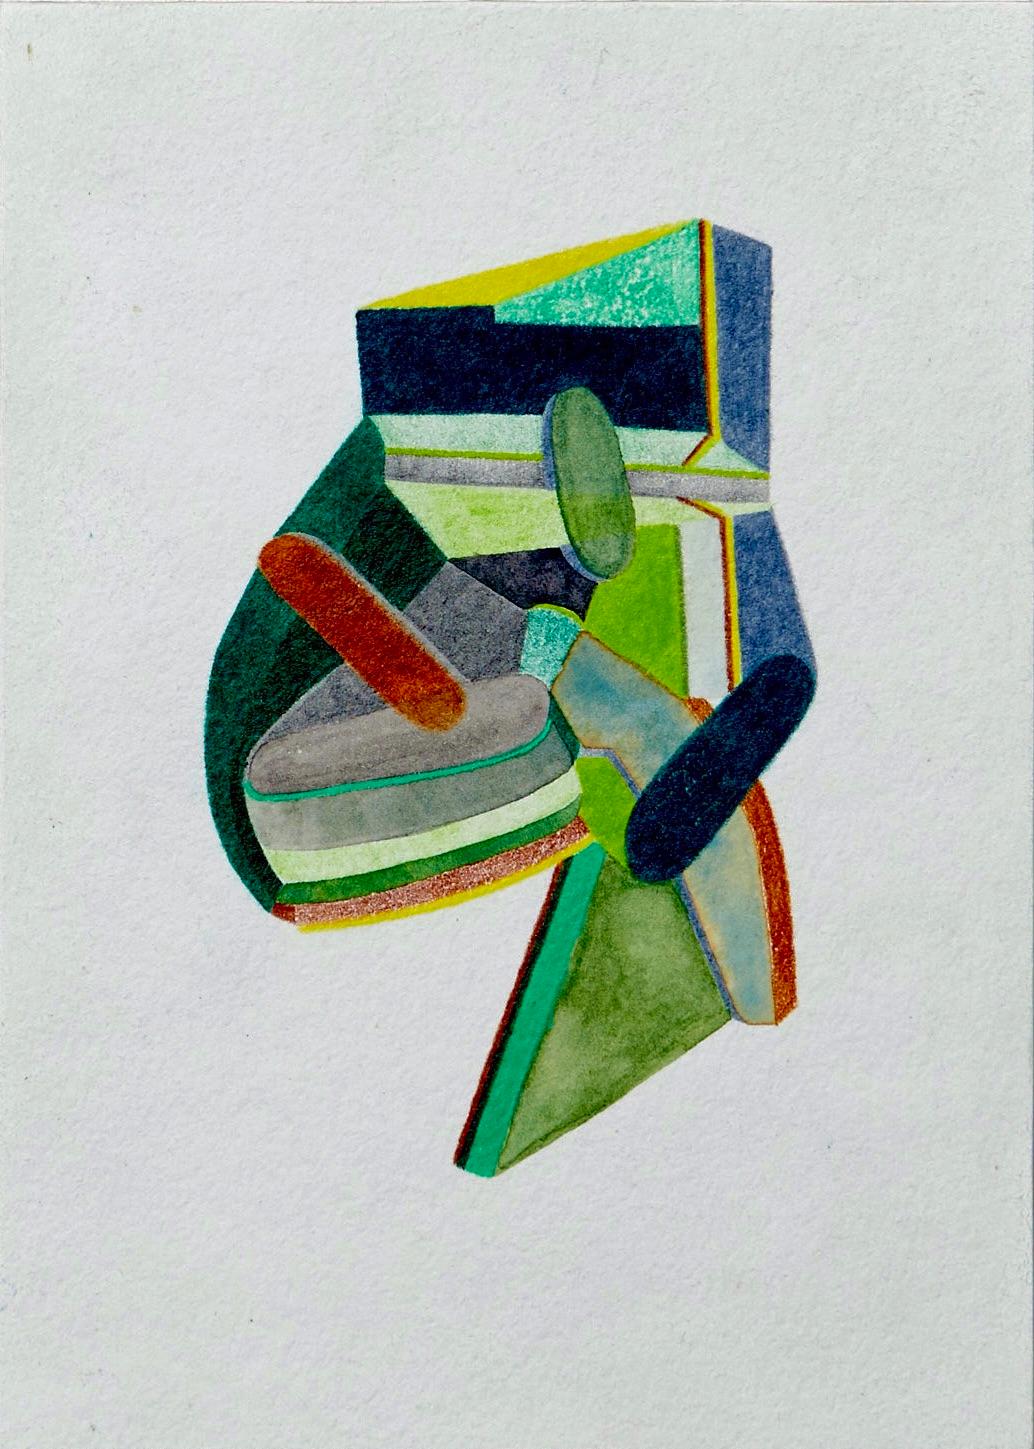 Untitled, Small Works No. 51, green geometric abstraction, work on paper